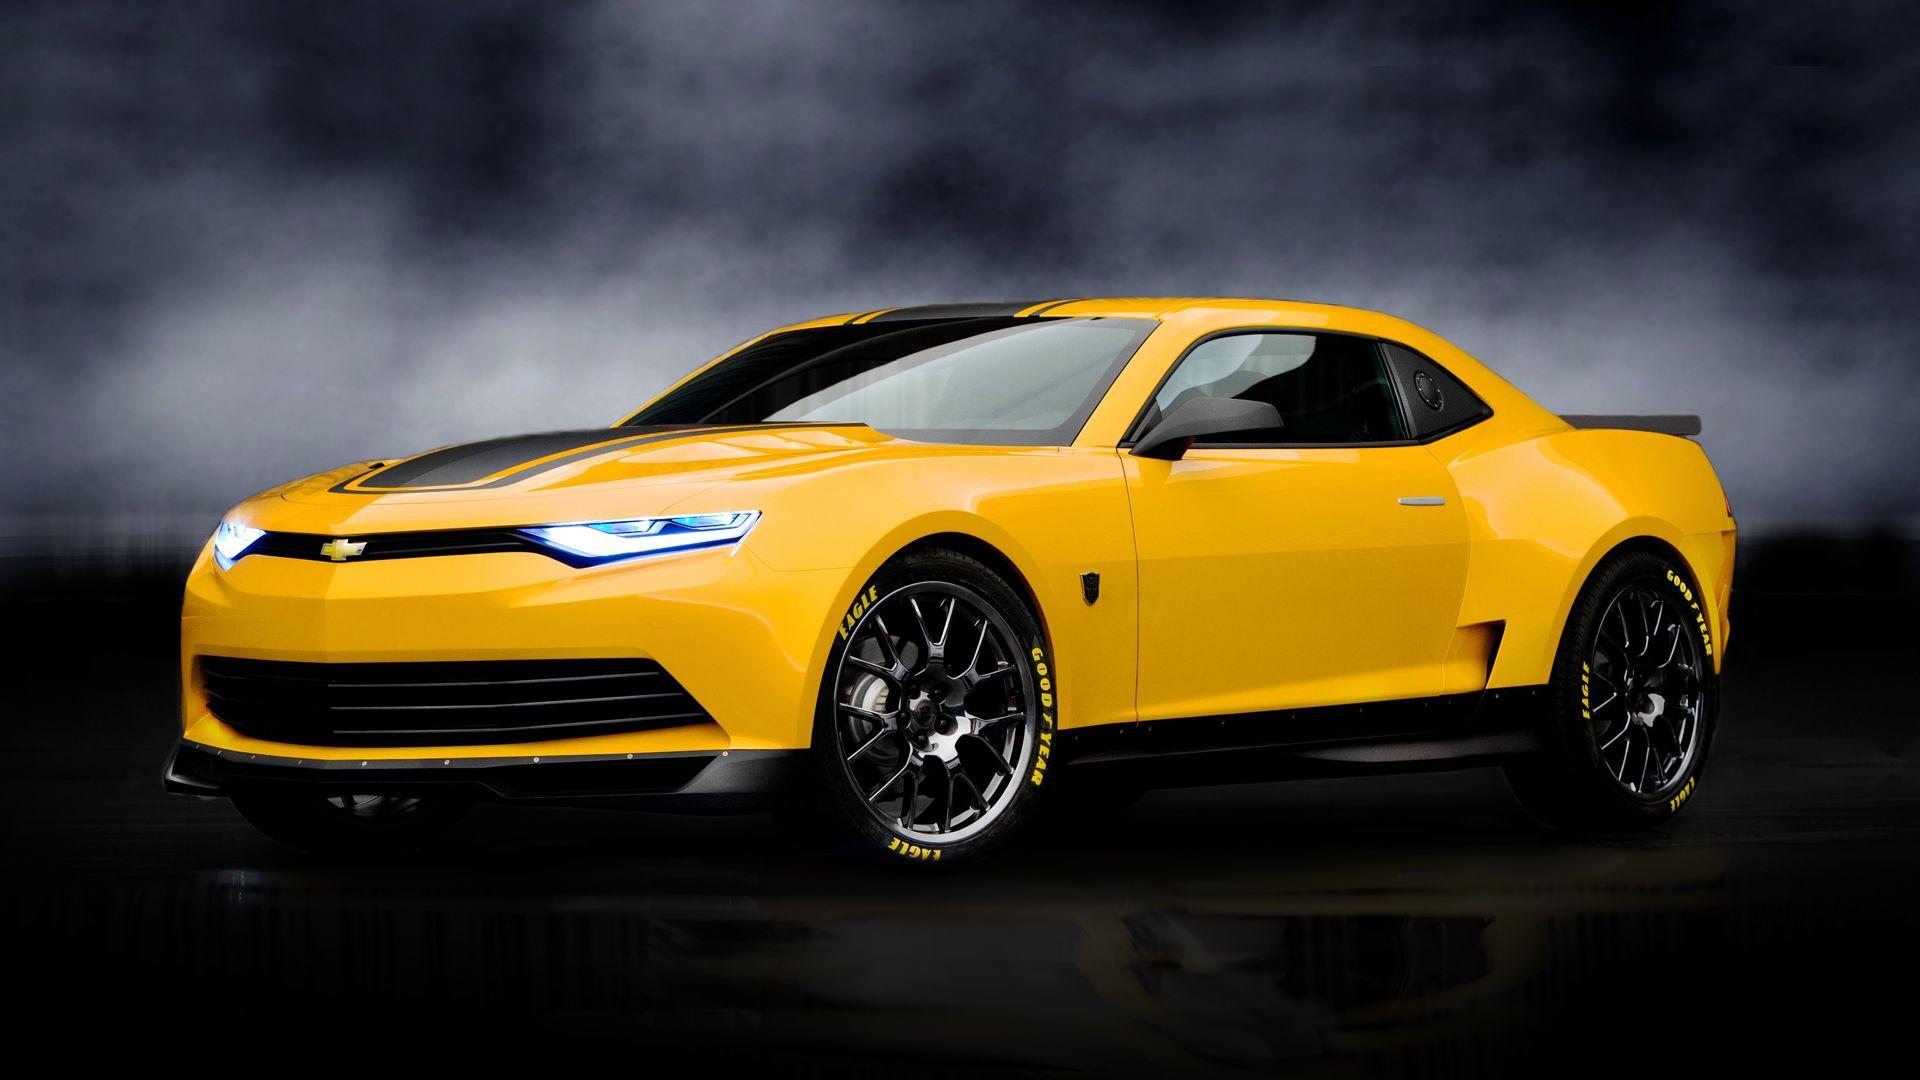 Chevrolet Camaro Transformers Car Wallpaper For Android